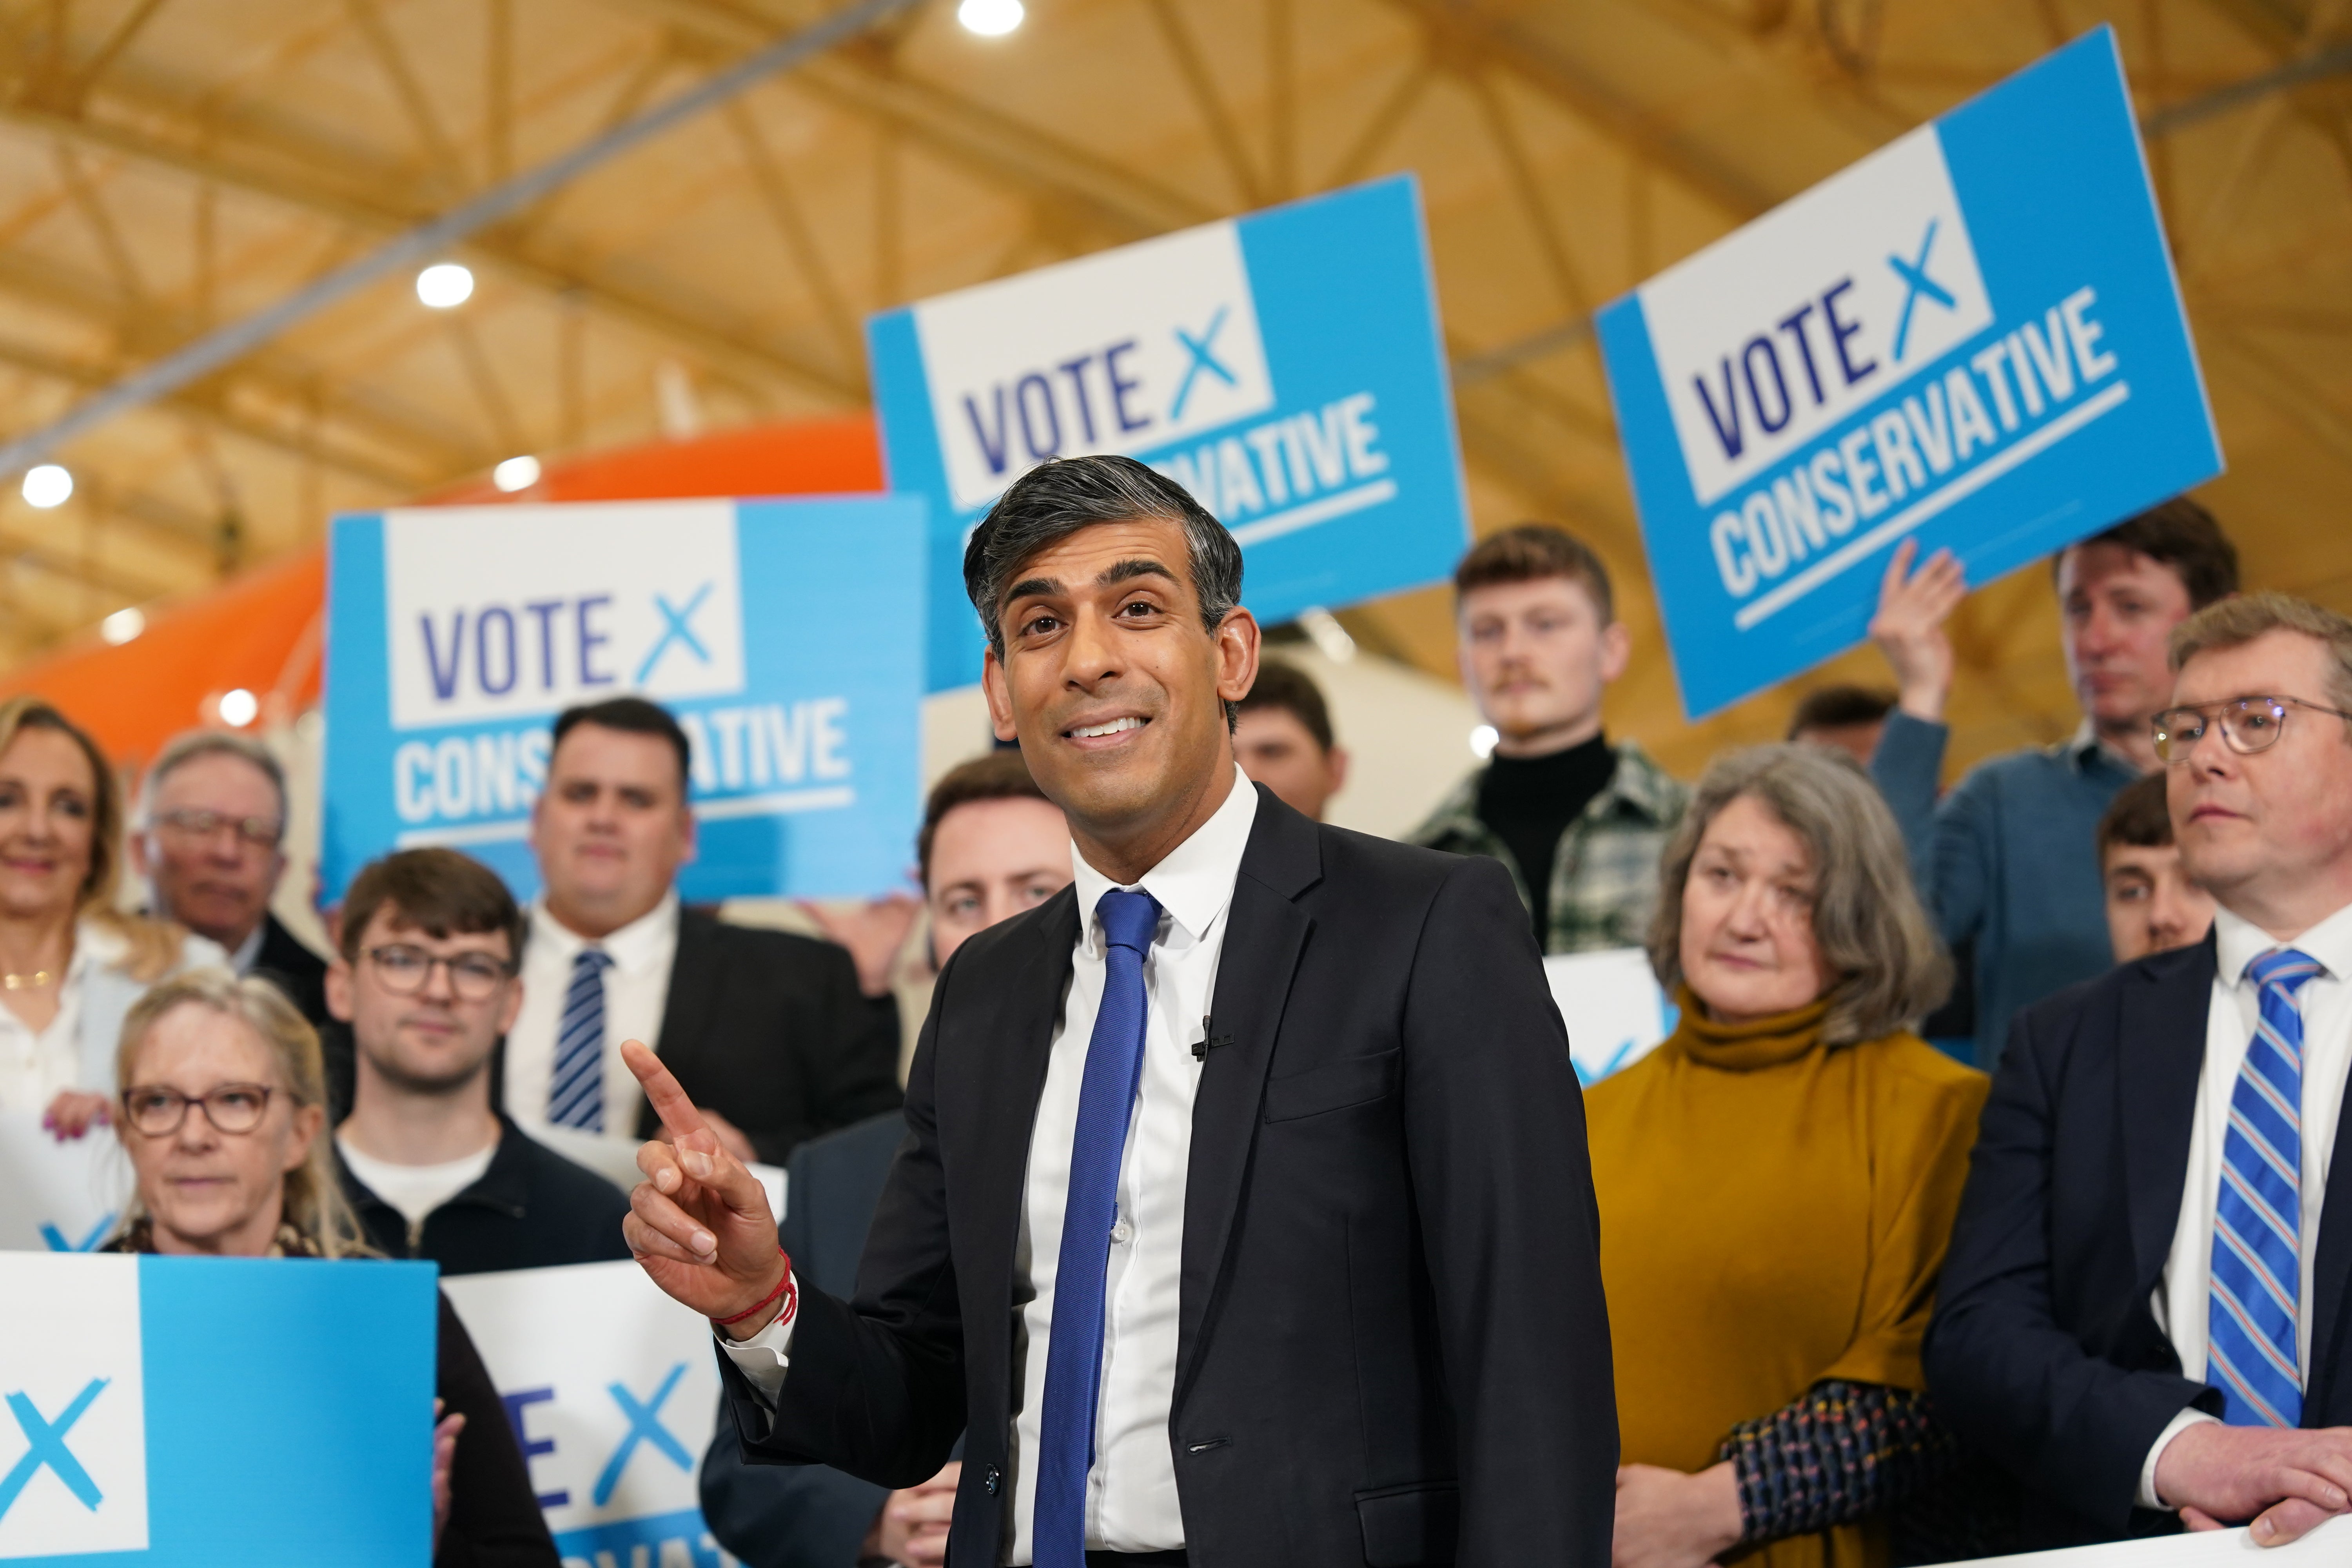 Rishi Sunak defended the claim the general election will lead to a hung parliament